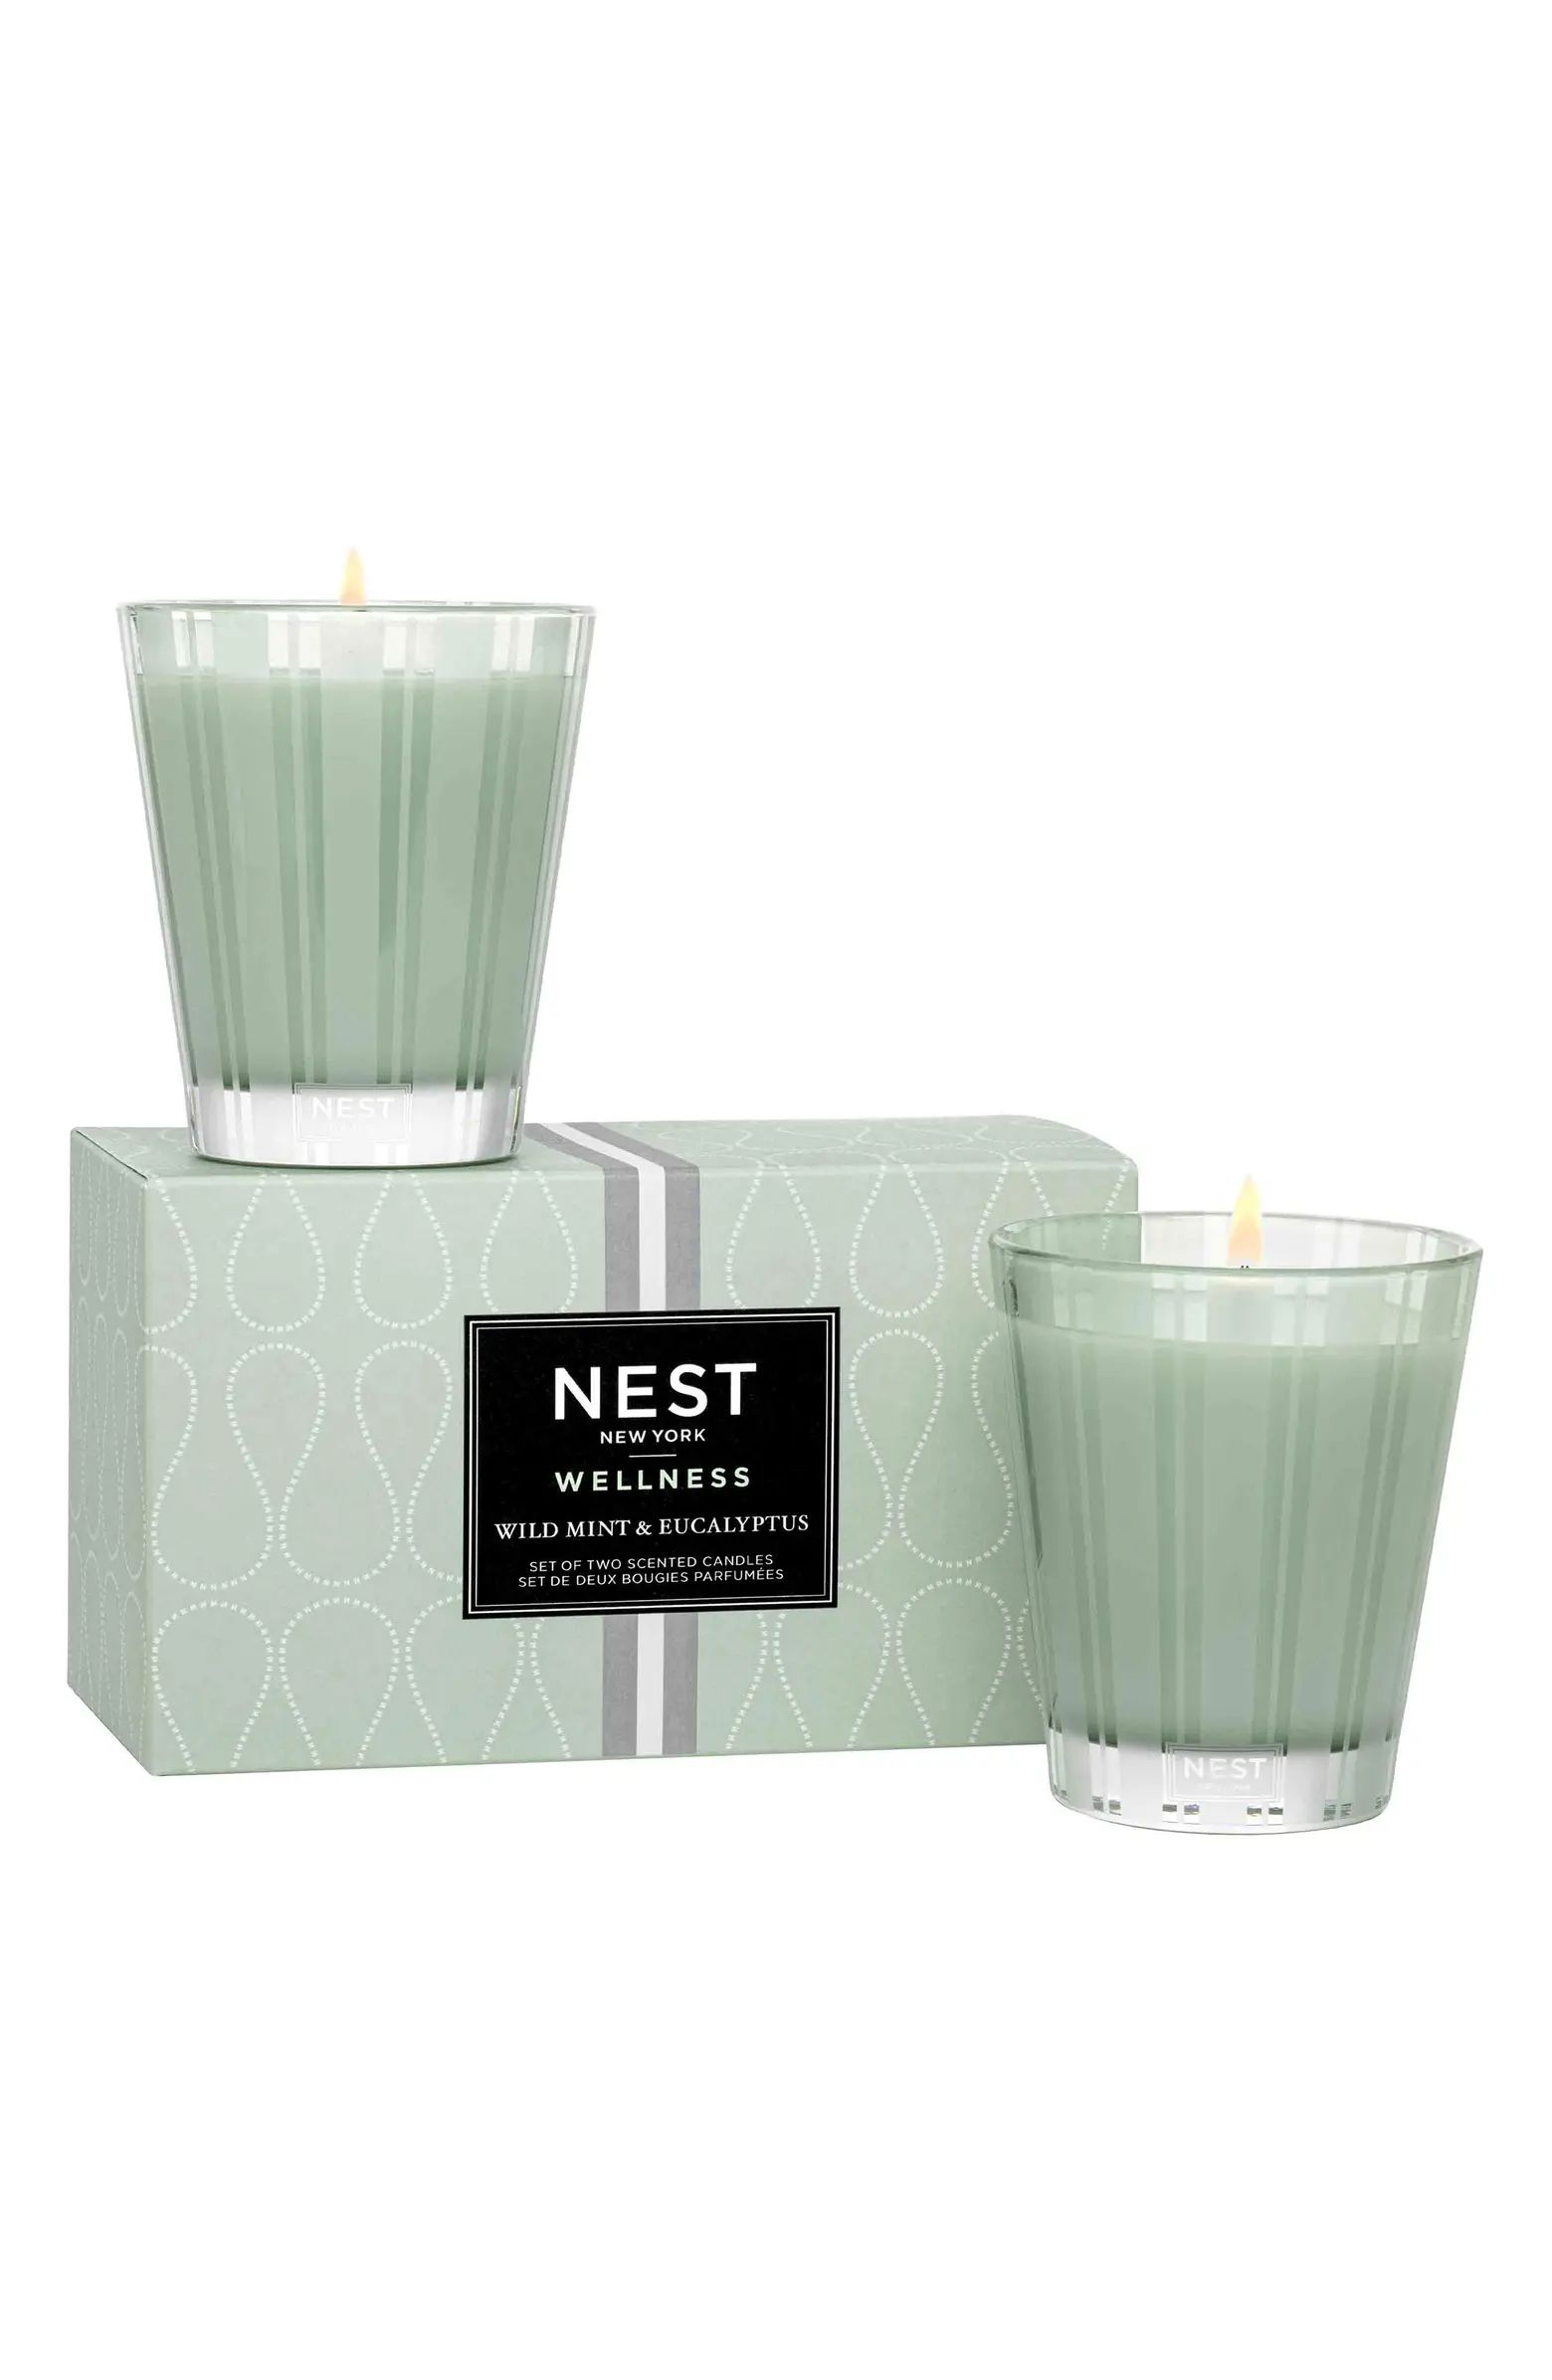 Wild Mint & Eucalyptus Candle Duo $92 Value | Nordstrom Rack